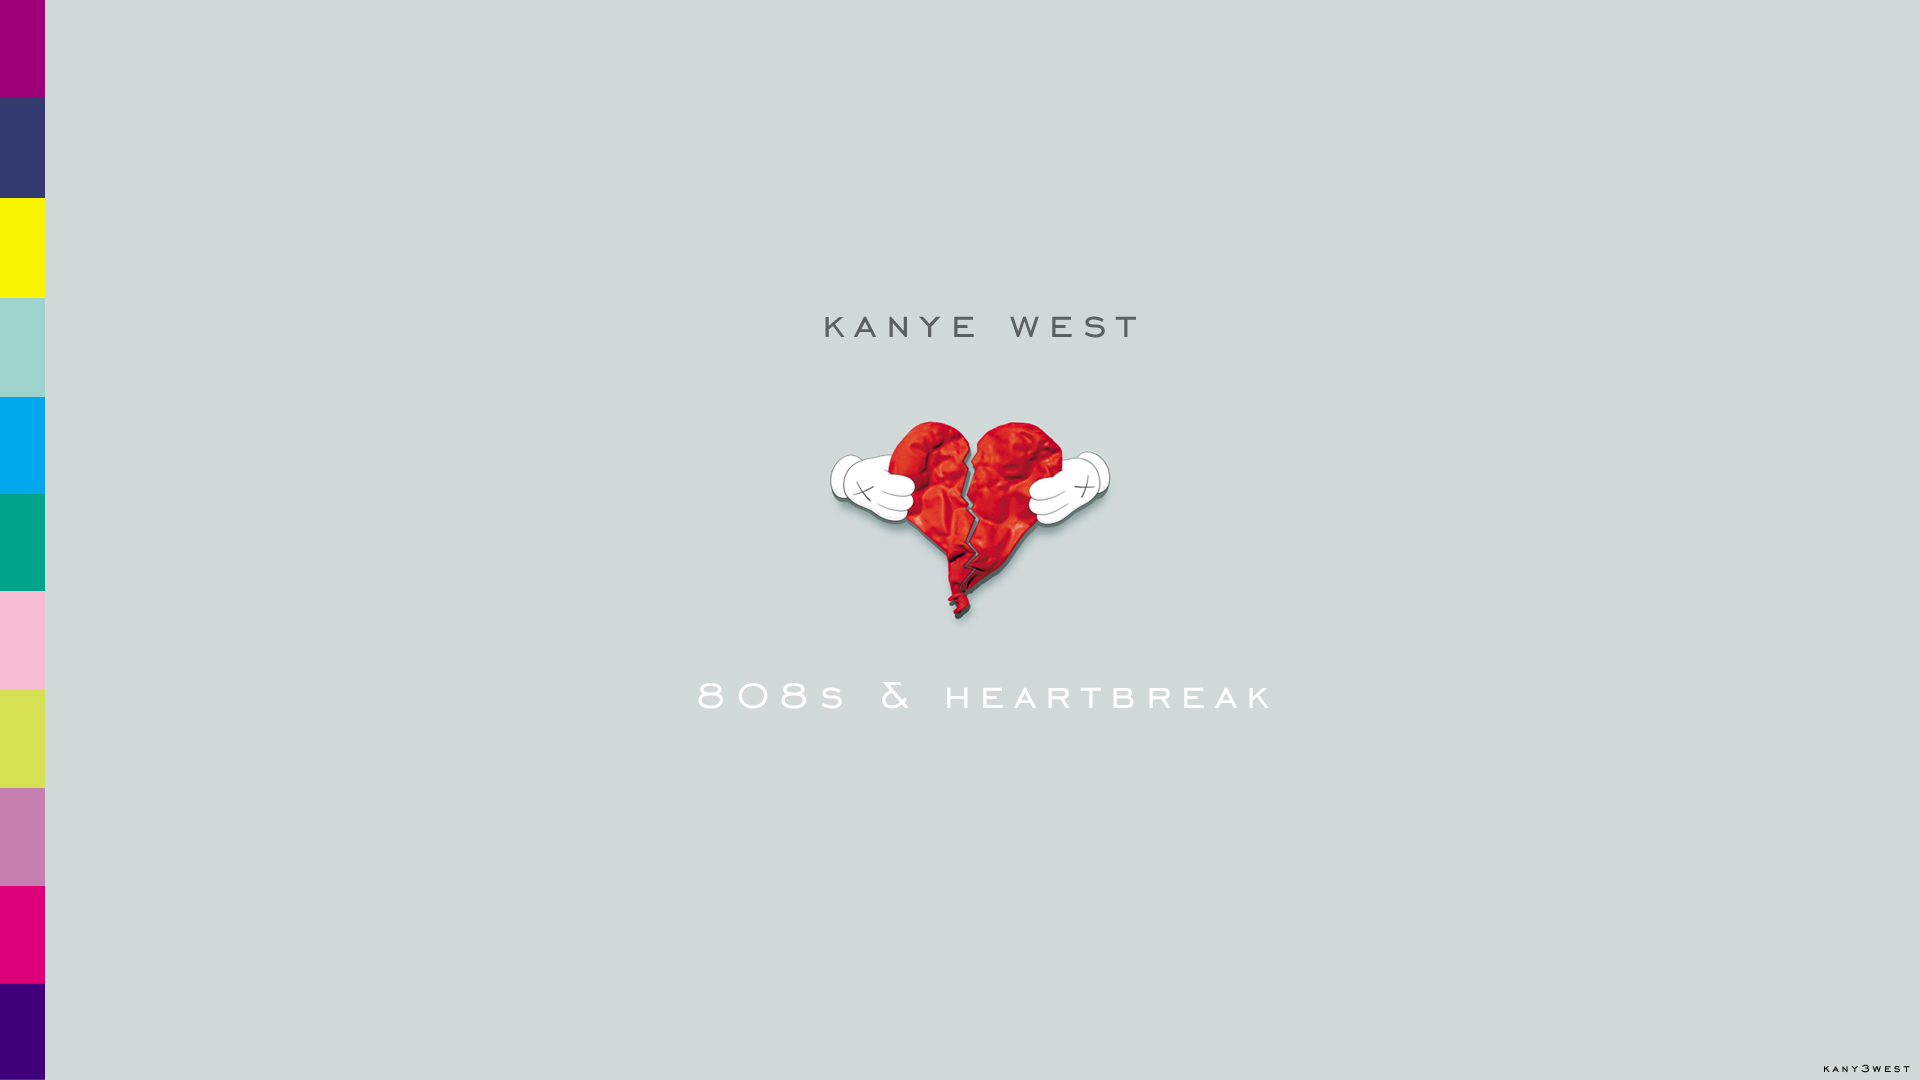 who was 808s and heartbreak about